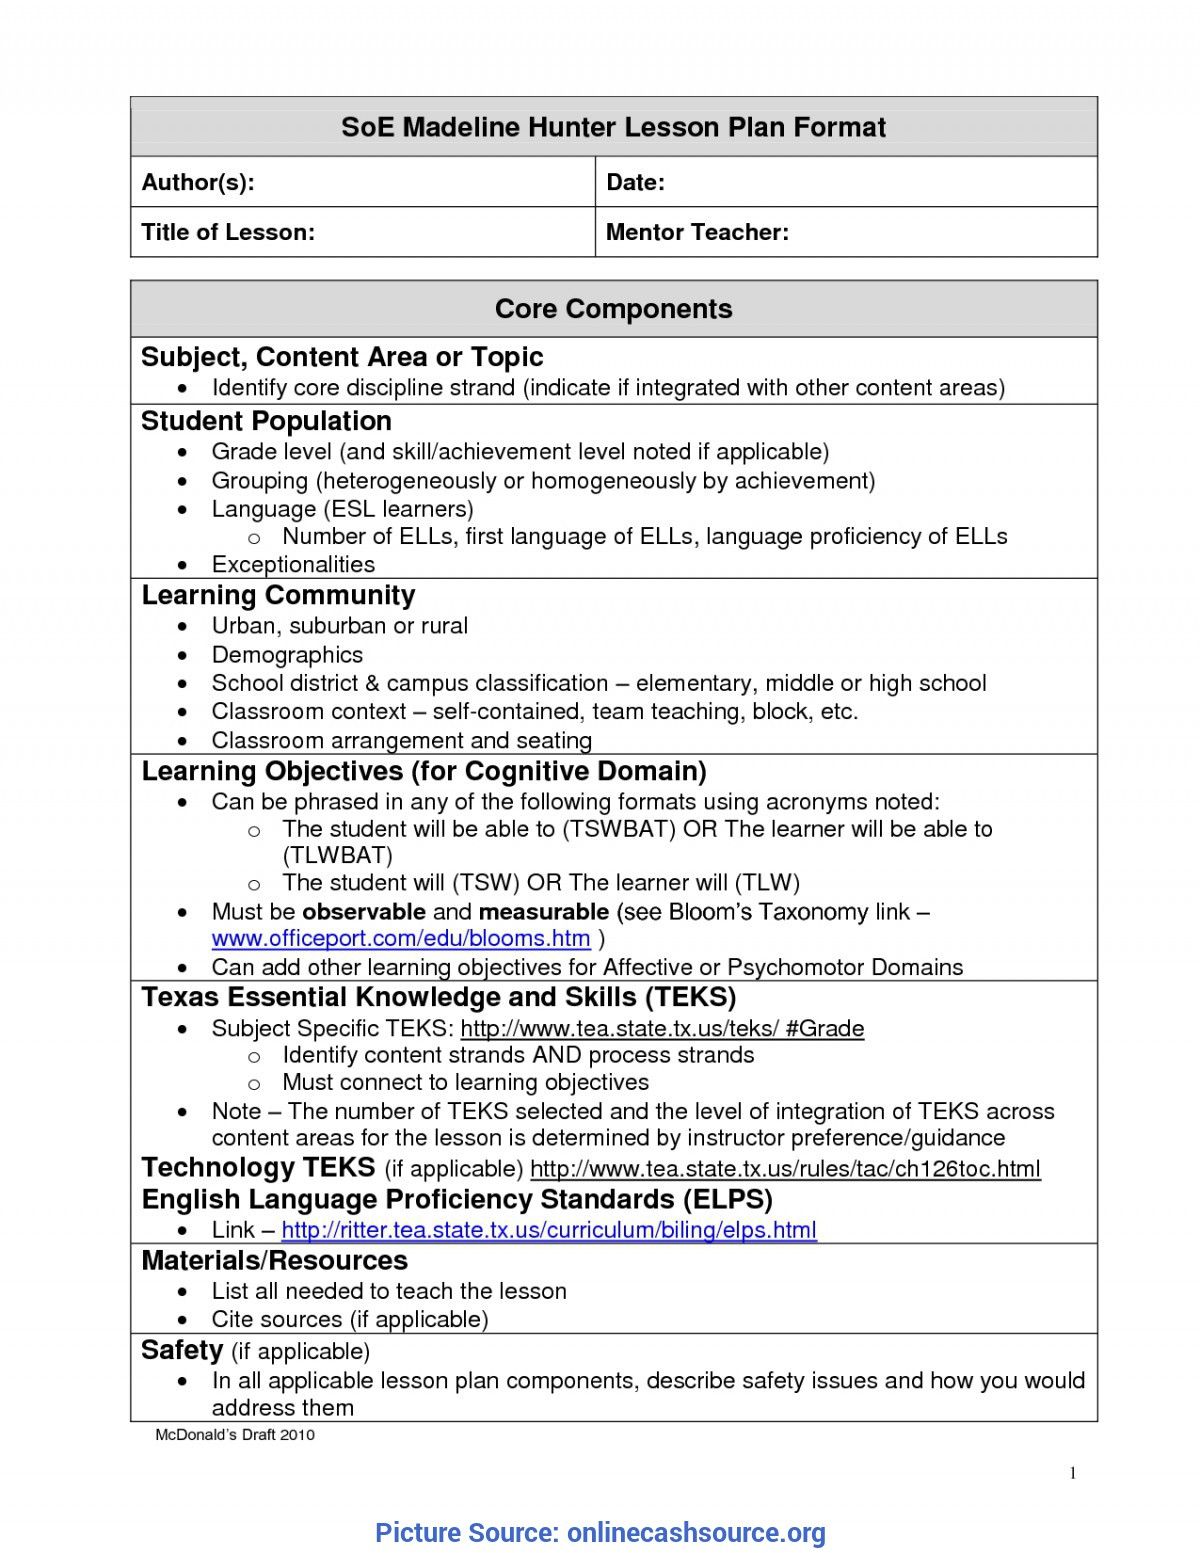 Madeline Hunter Lesson Plan Template Word Colona Rsd7 Intended For Madeline Hunte Madeline Hunter Lesson Plan Lesson Plan Templates Lesson Plan Template Free